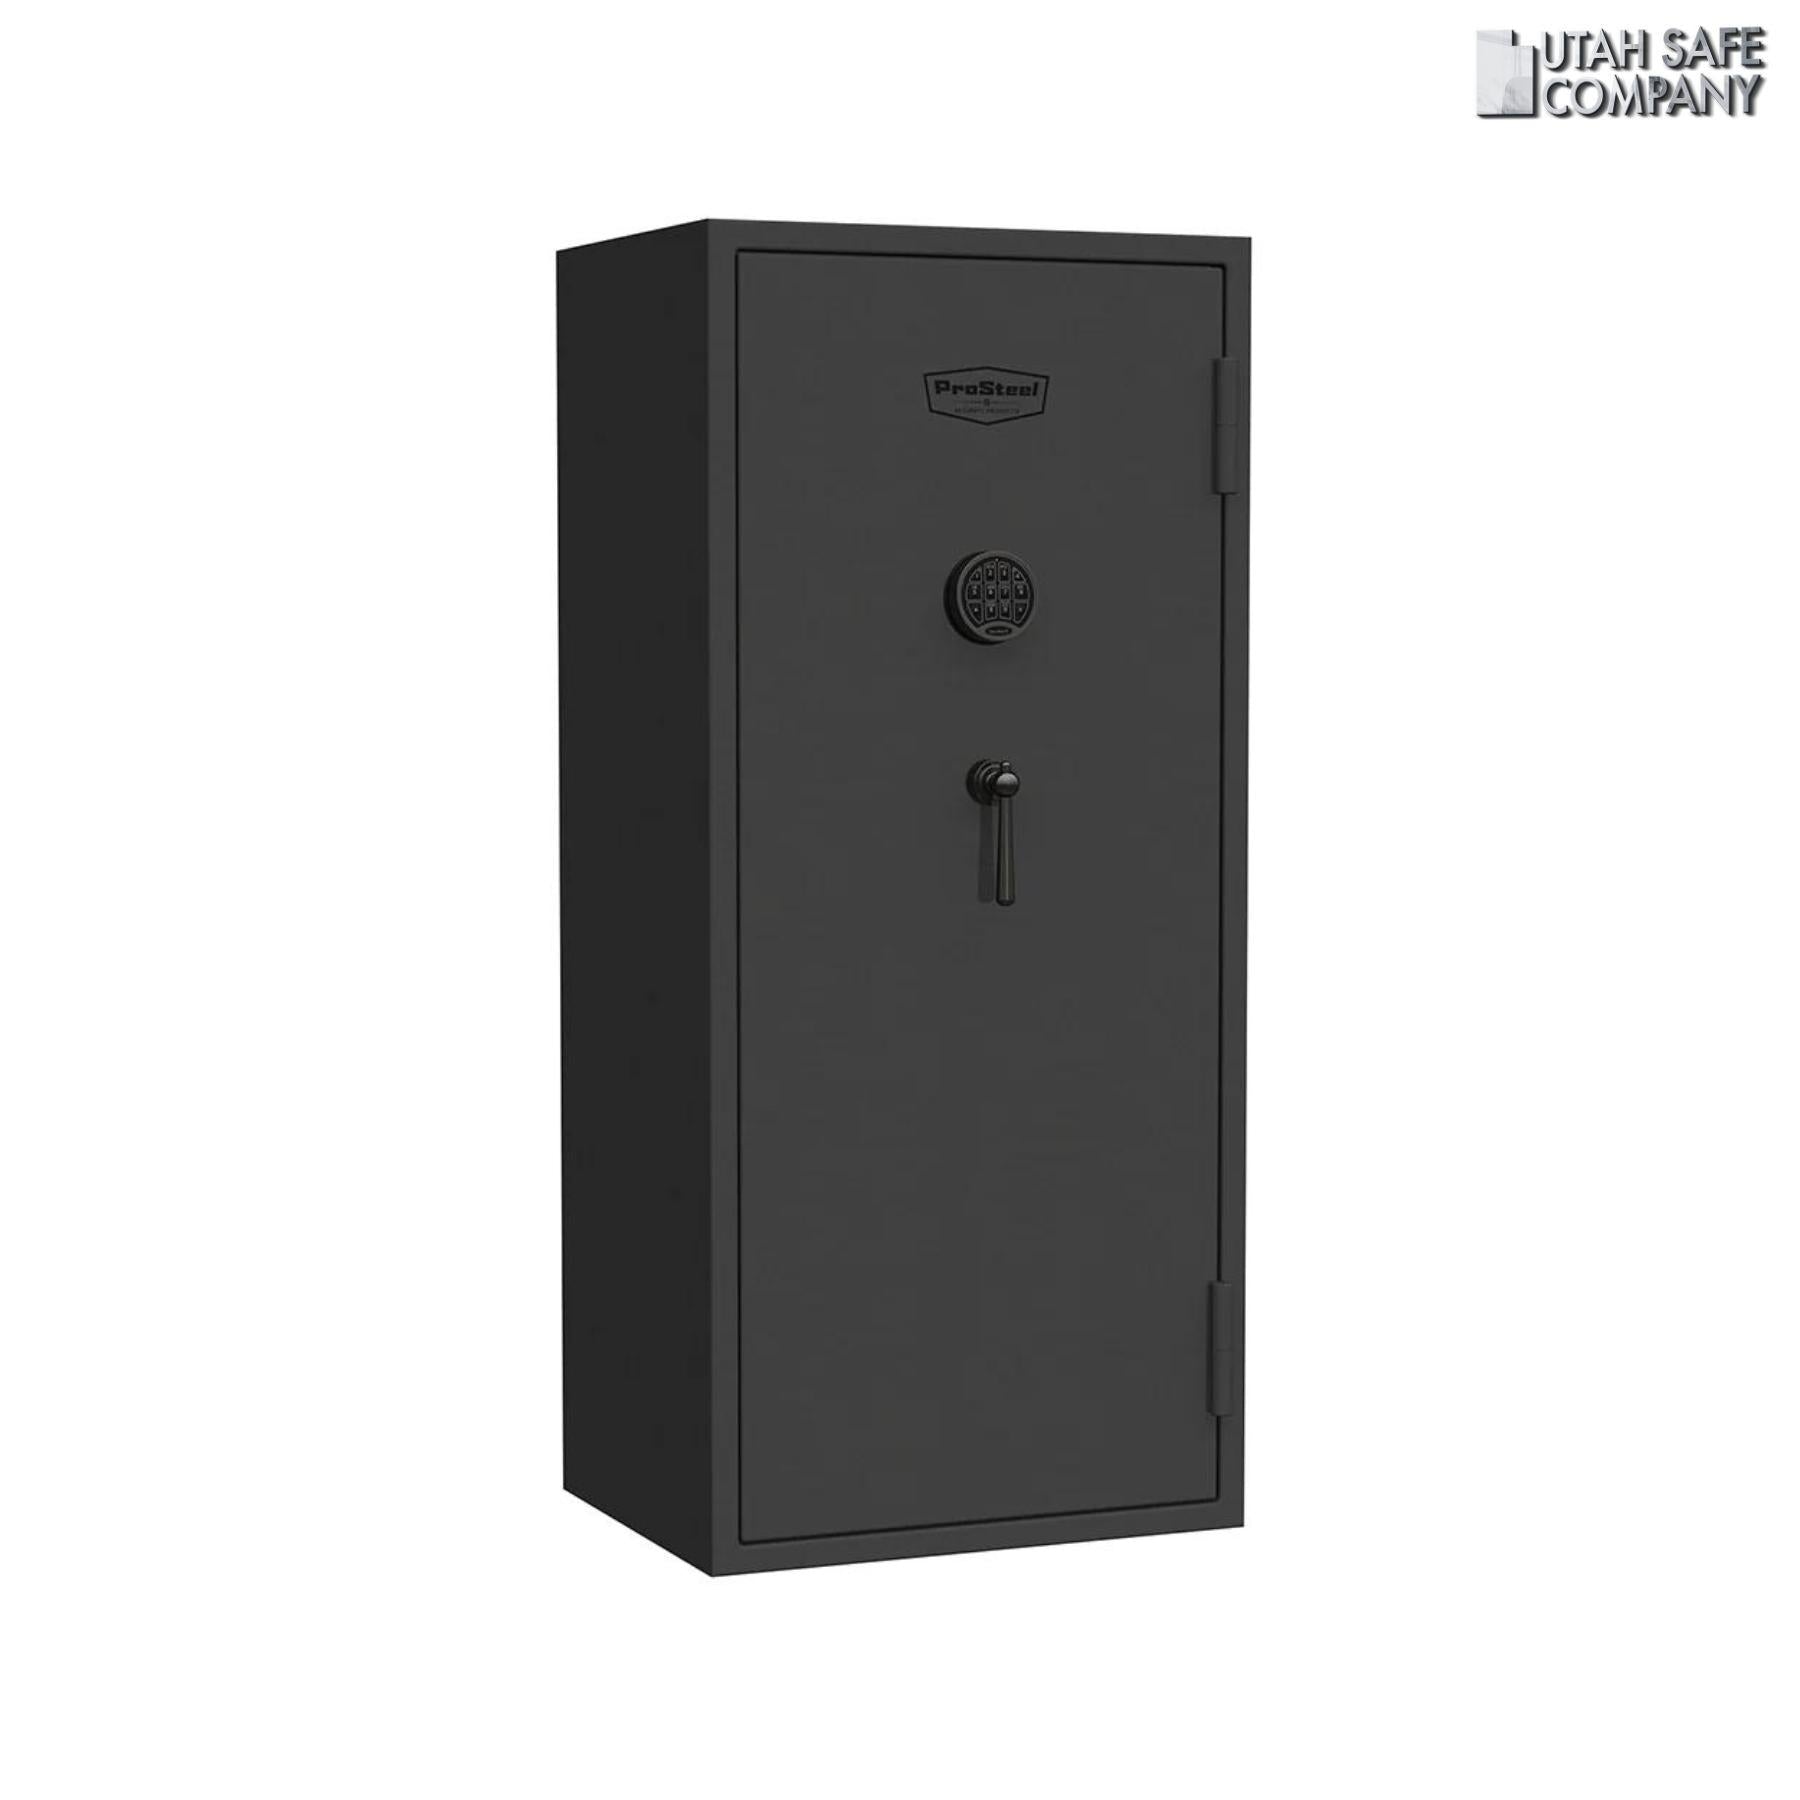 ProSteel Deluxe PSD19 Home Safe